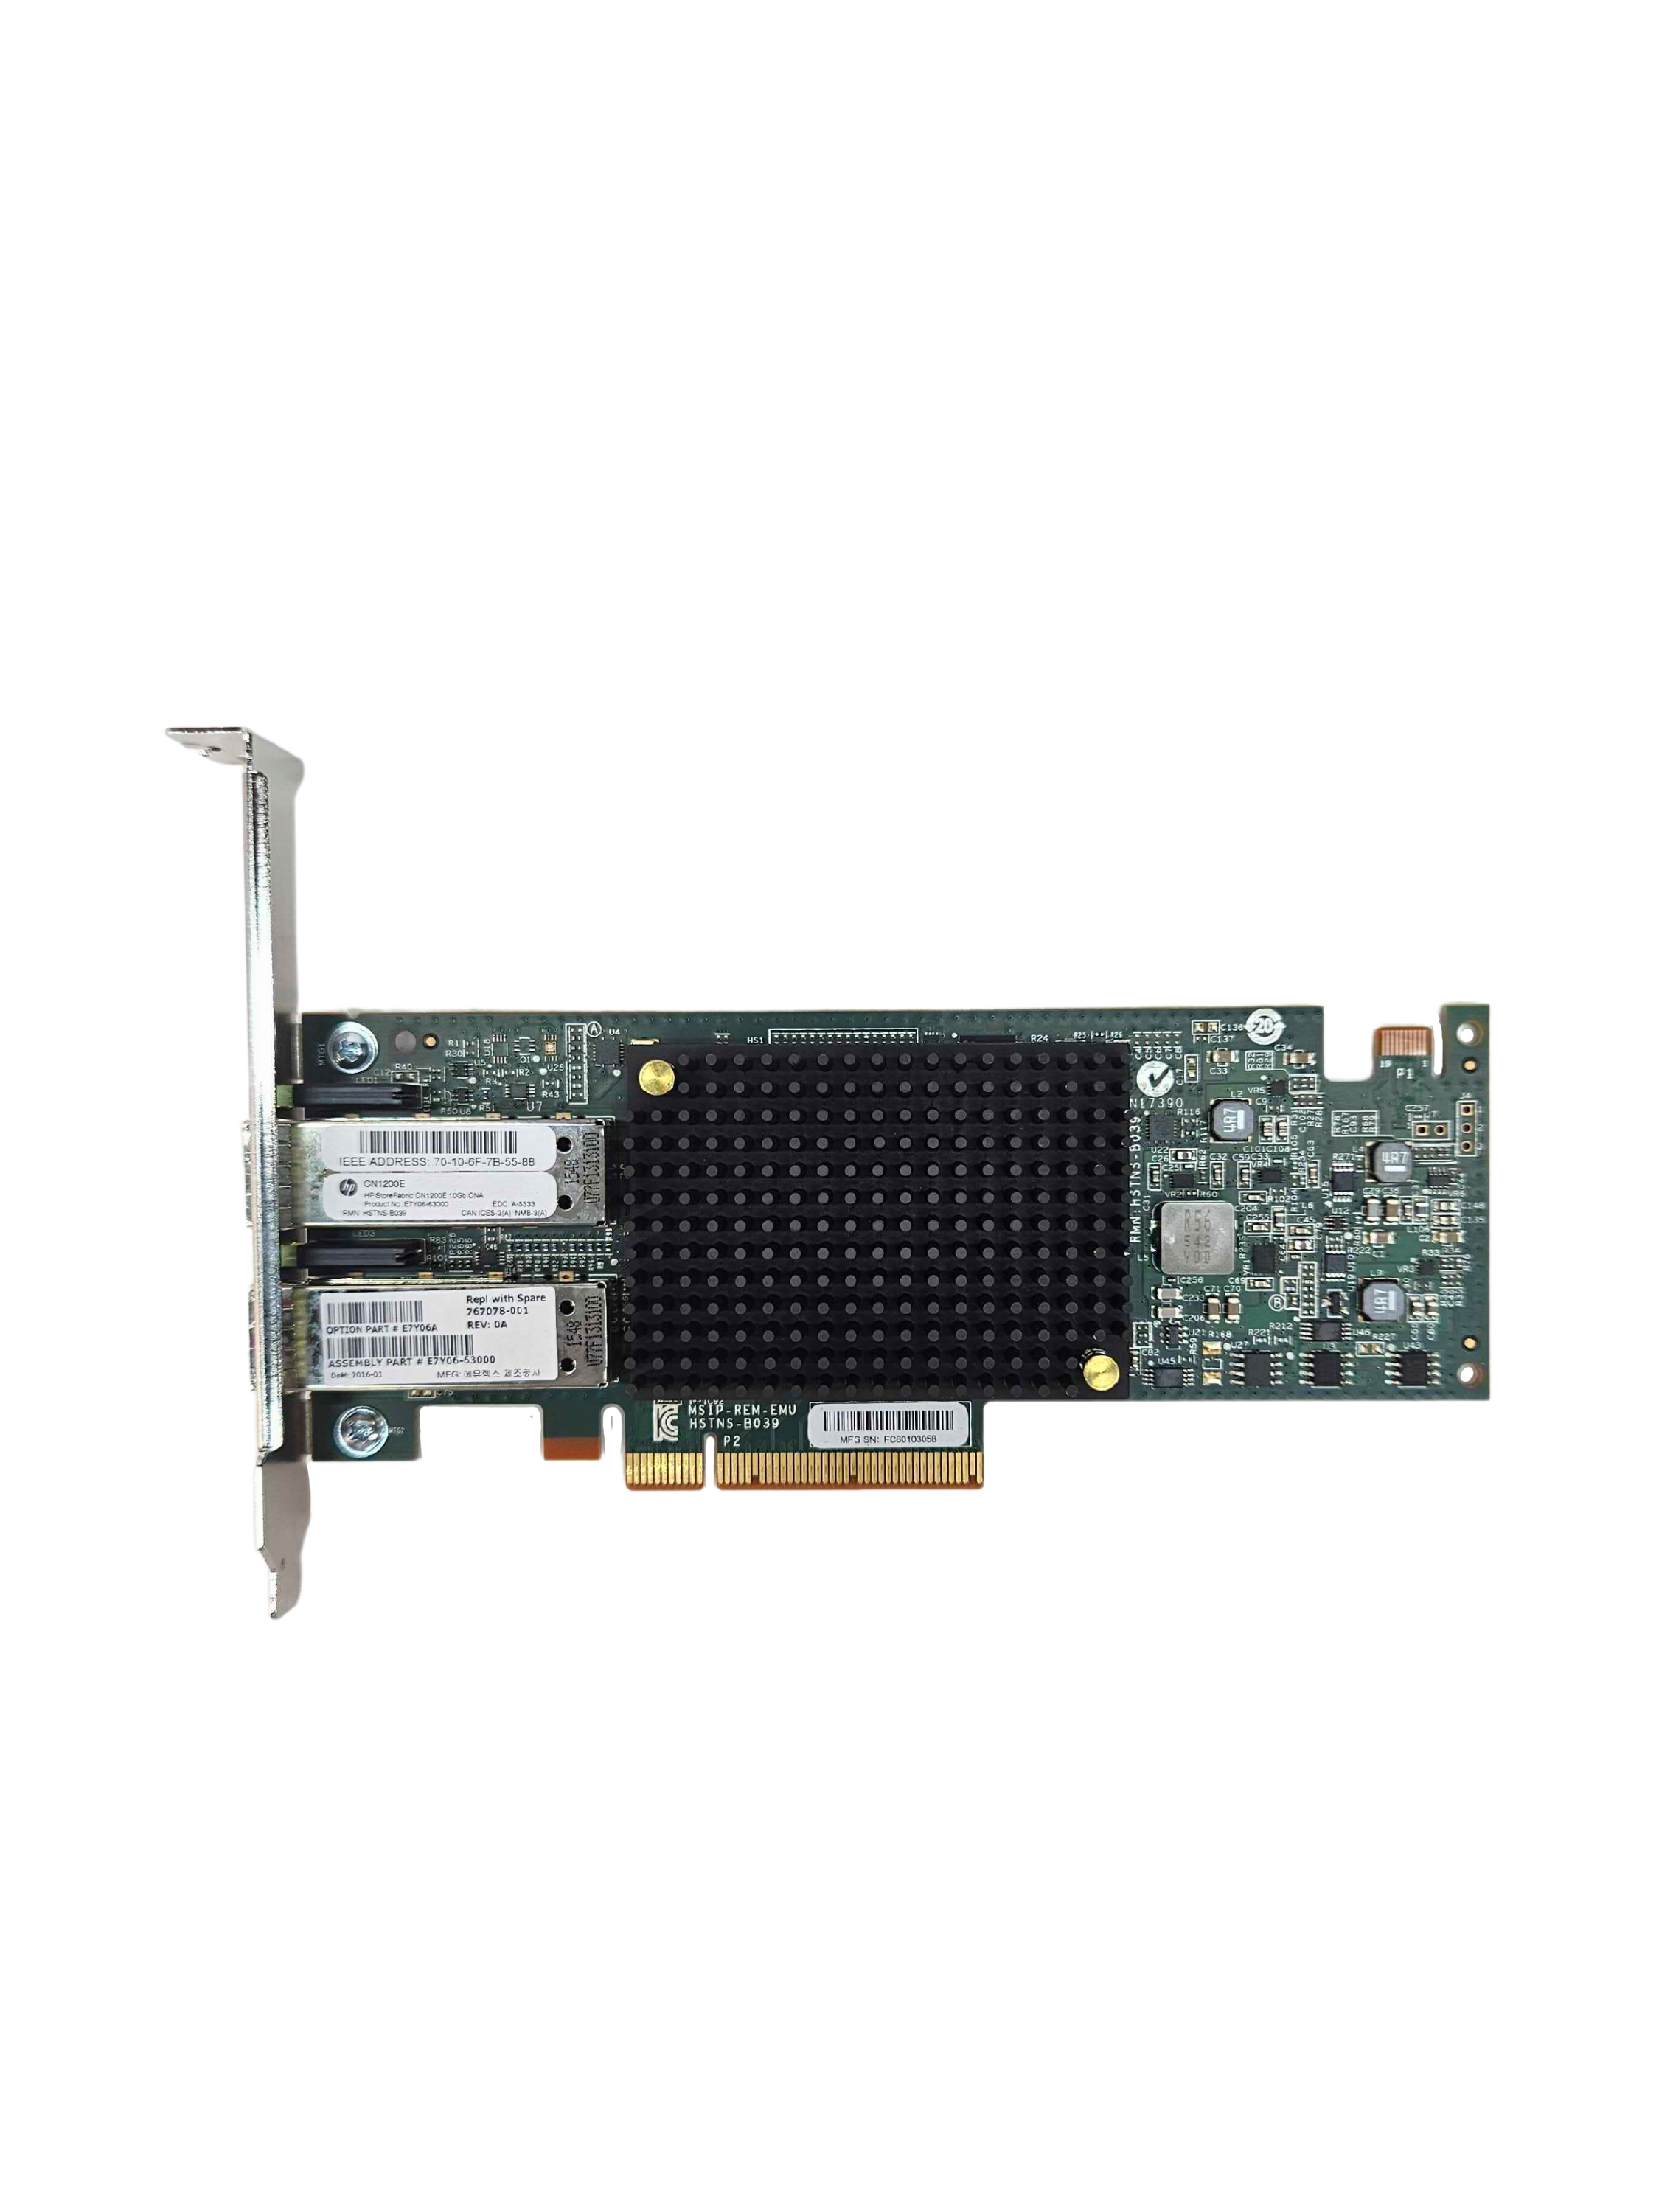 CN1200E 10GB CONVERGED NETWORK ADAPTER (767078-001)